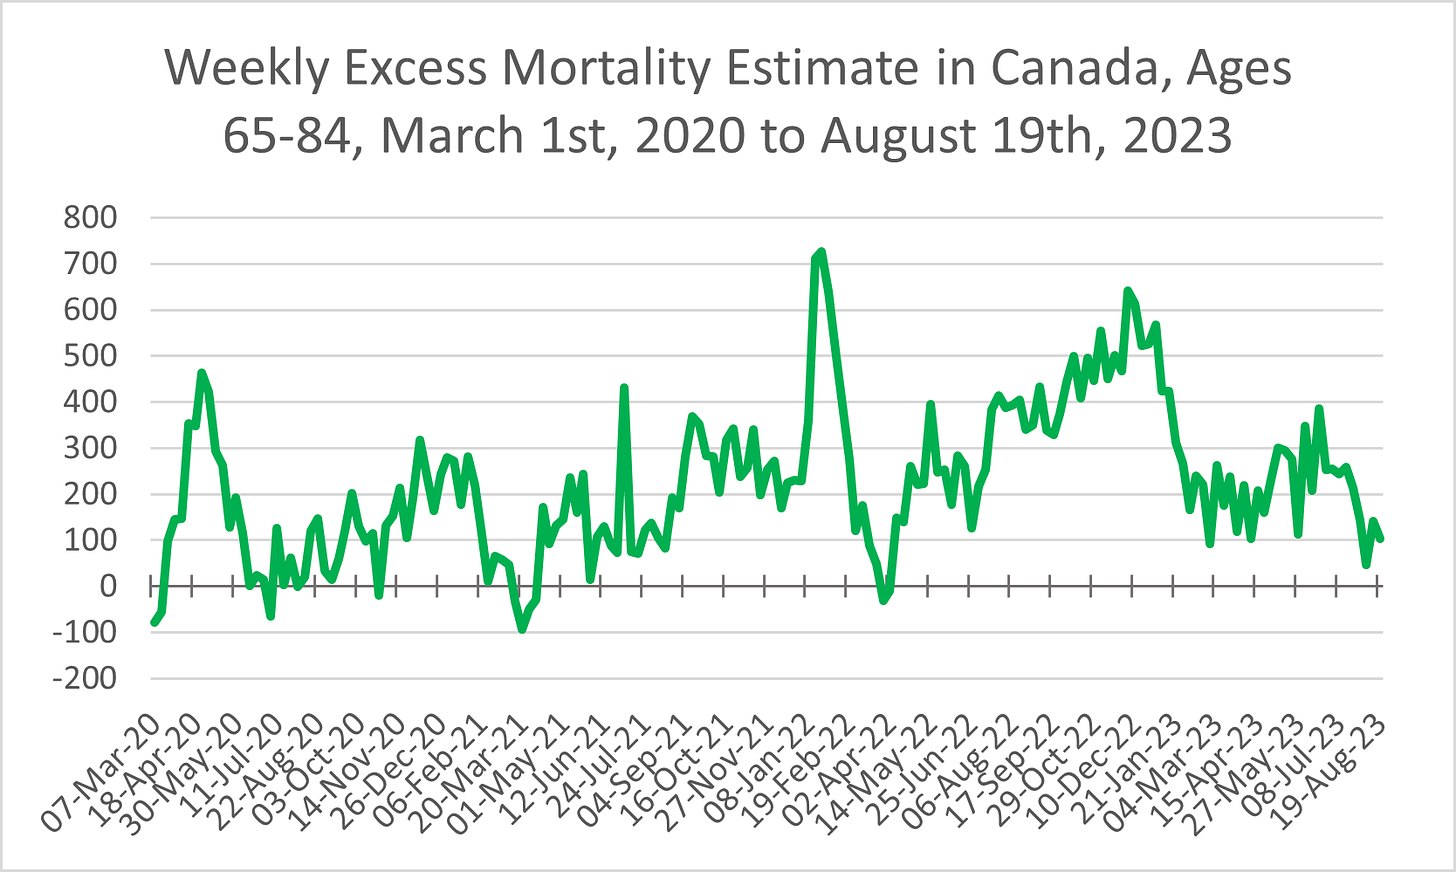 Line chart showing weekly excess mortality in Canada among those aged 65-84 from March 1st, 2020 to August 19th, 2023. The figure is above 0 for the most part (indicating more deaths than expected) aside from slight dips below 0 in early March 2020, July 2020, March 2021, and March 2022. The highest points were 450 in April 2020, 700 in January 2022, and 650 in December 2022.